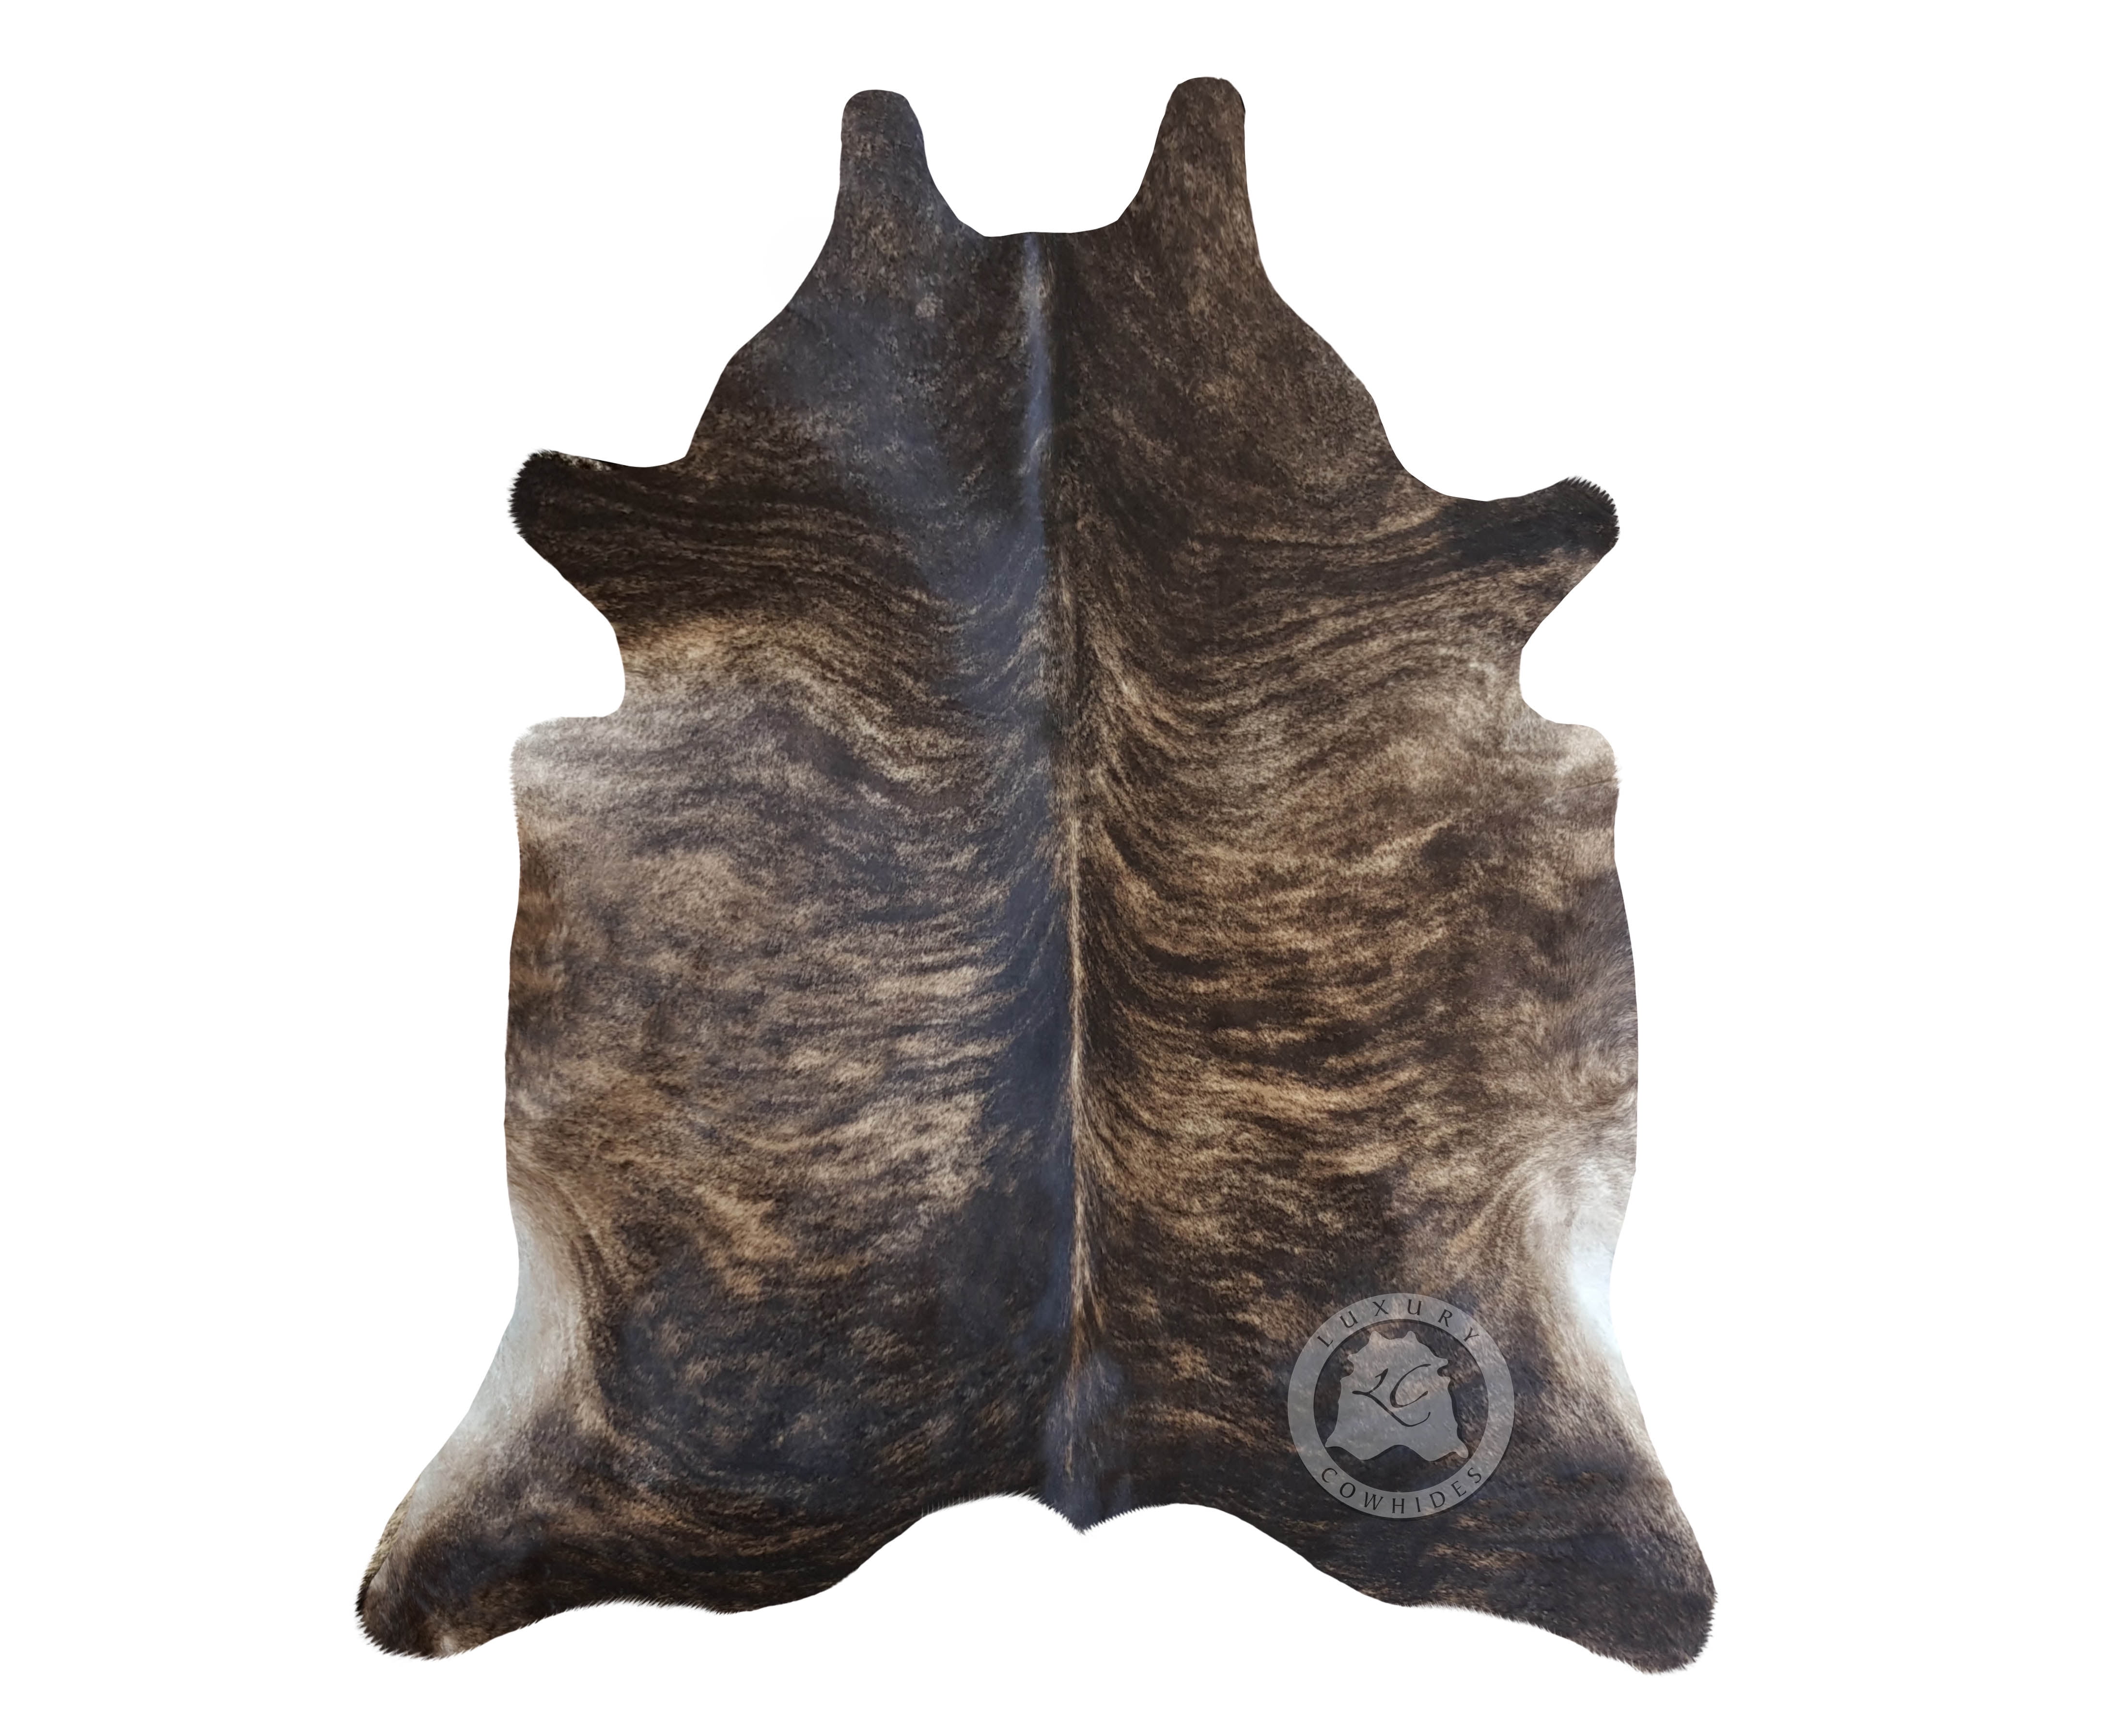 6ft x 7ft 180cm x 210cm from Luxury COWHIDES Brindle Dark Tricolor Cowhide Rug Large Approx 